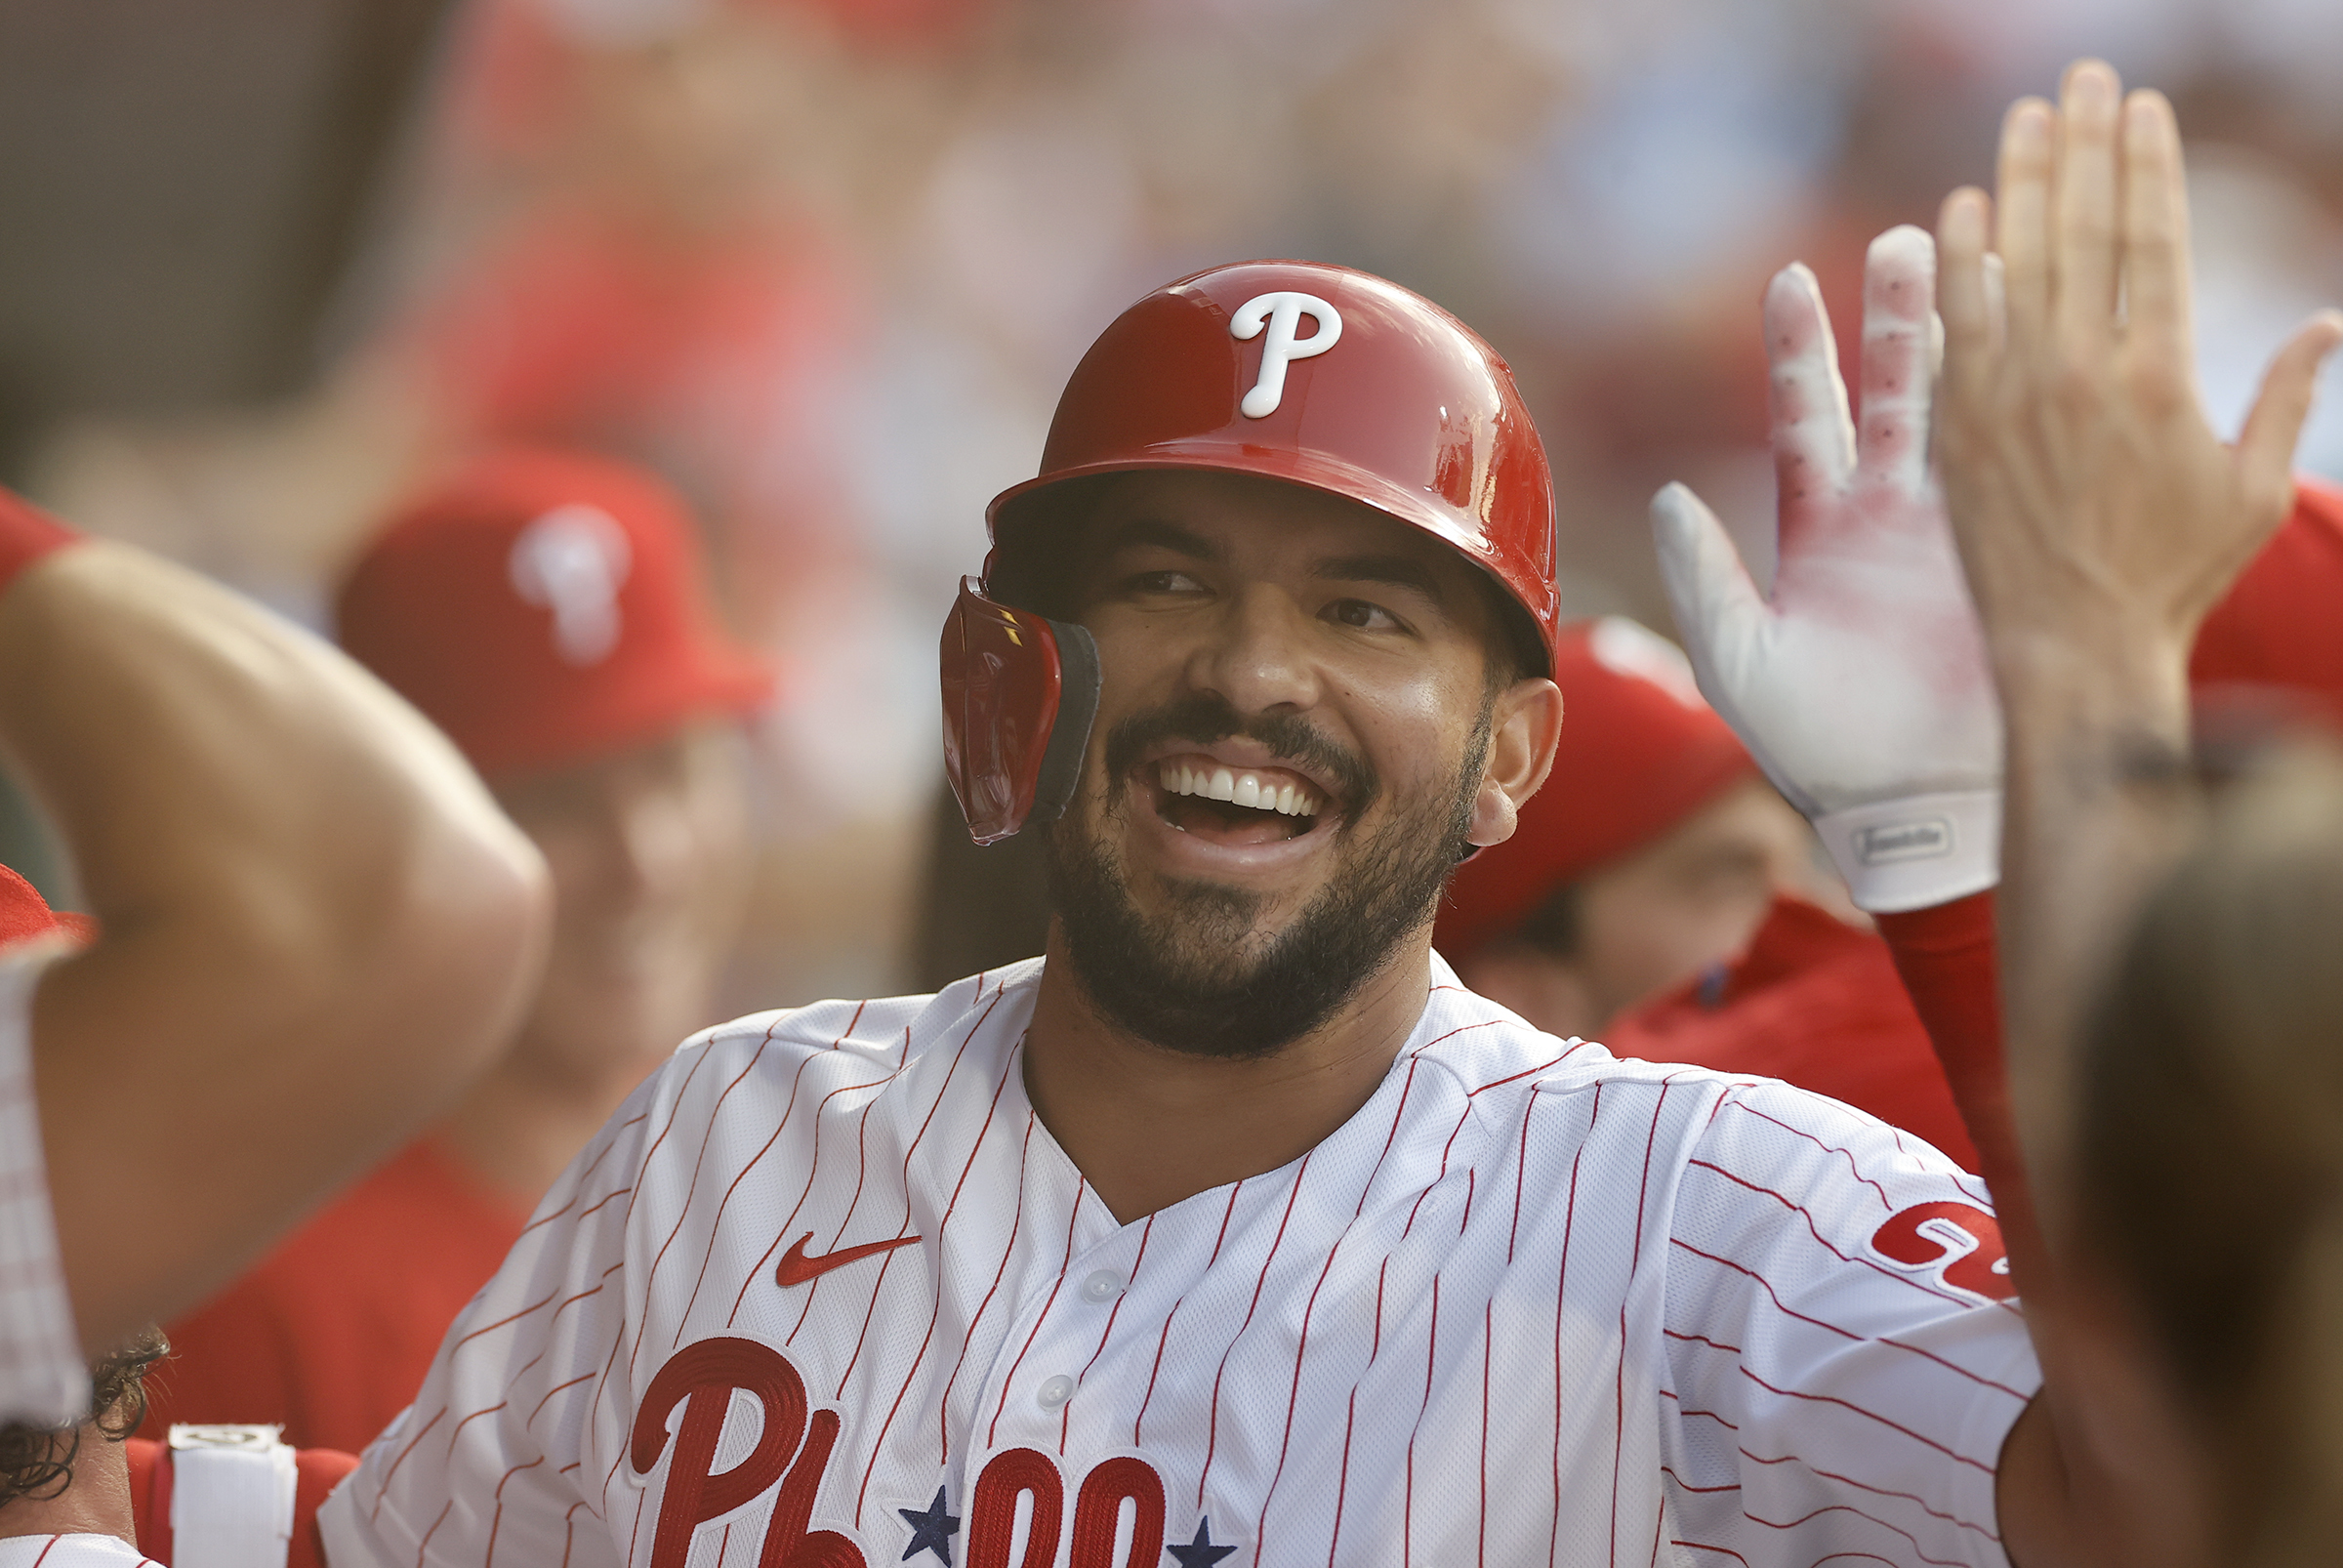 Phillies reliever Seranthony Domínguez shows 'positive signs' as he begins  minor-league rehab in Jersey Shore